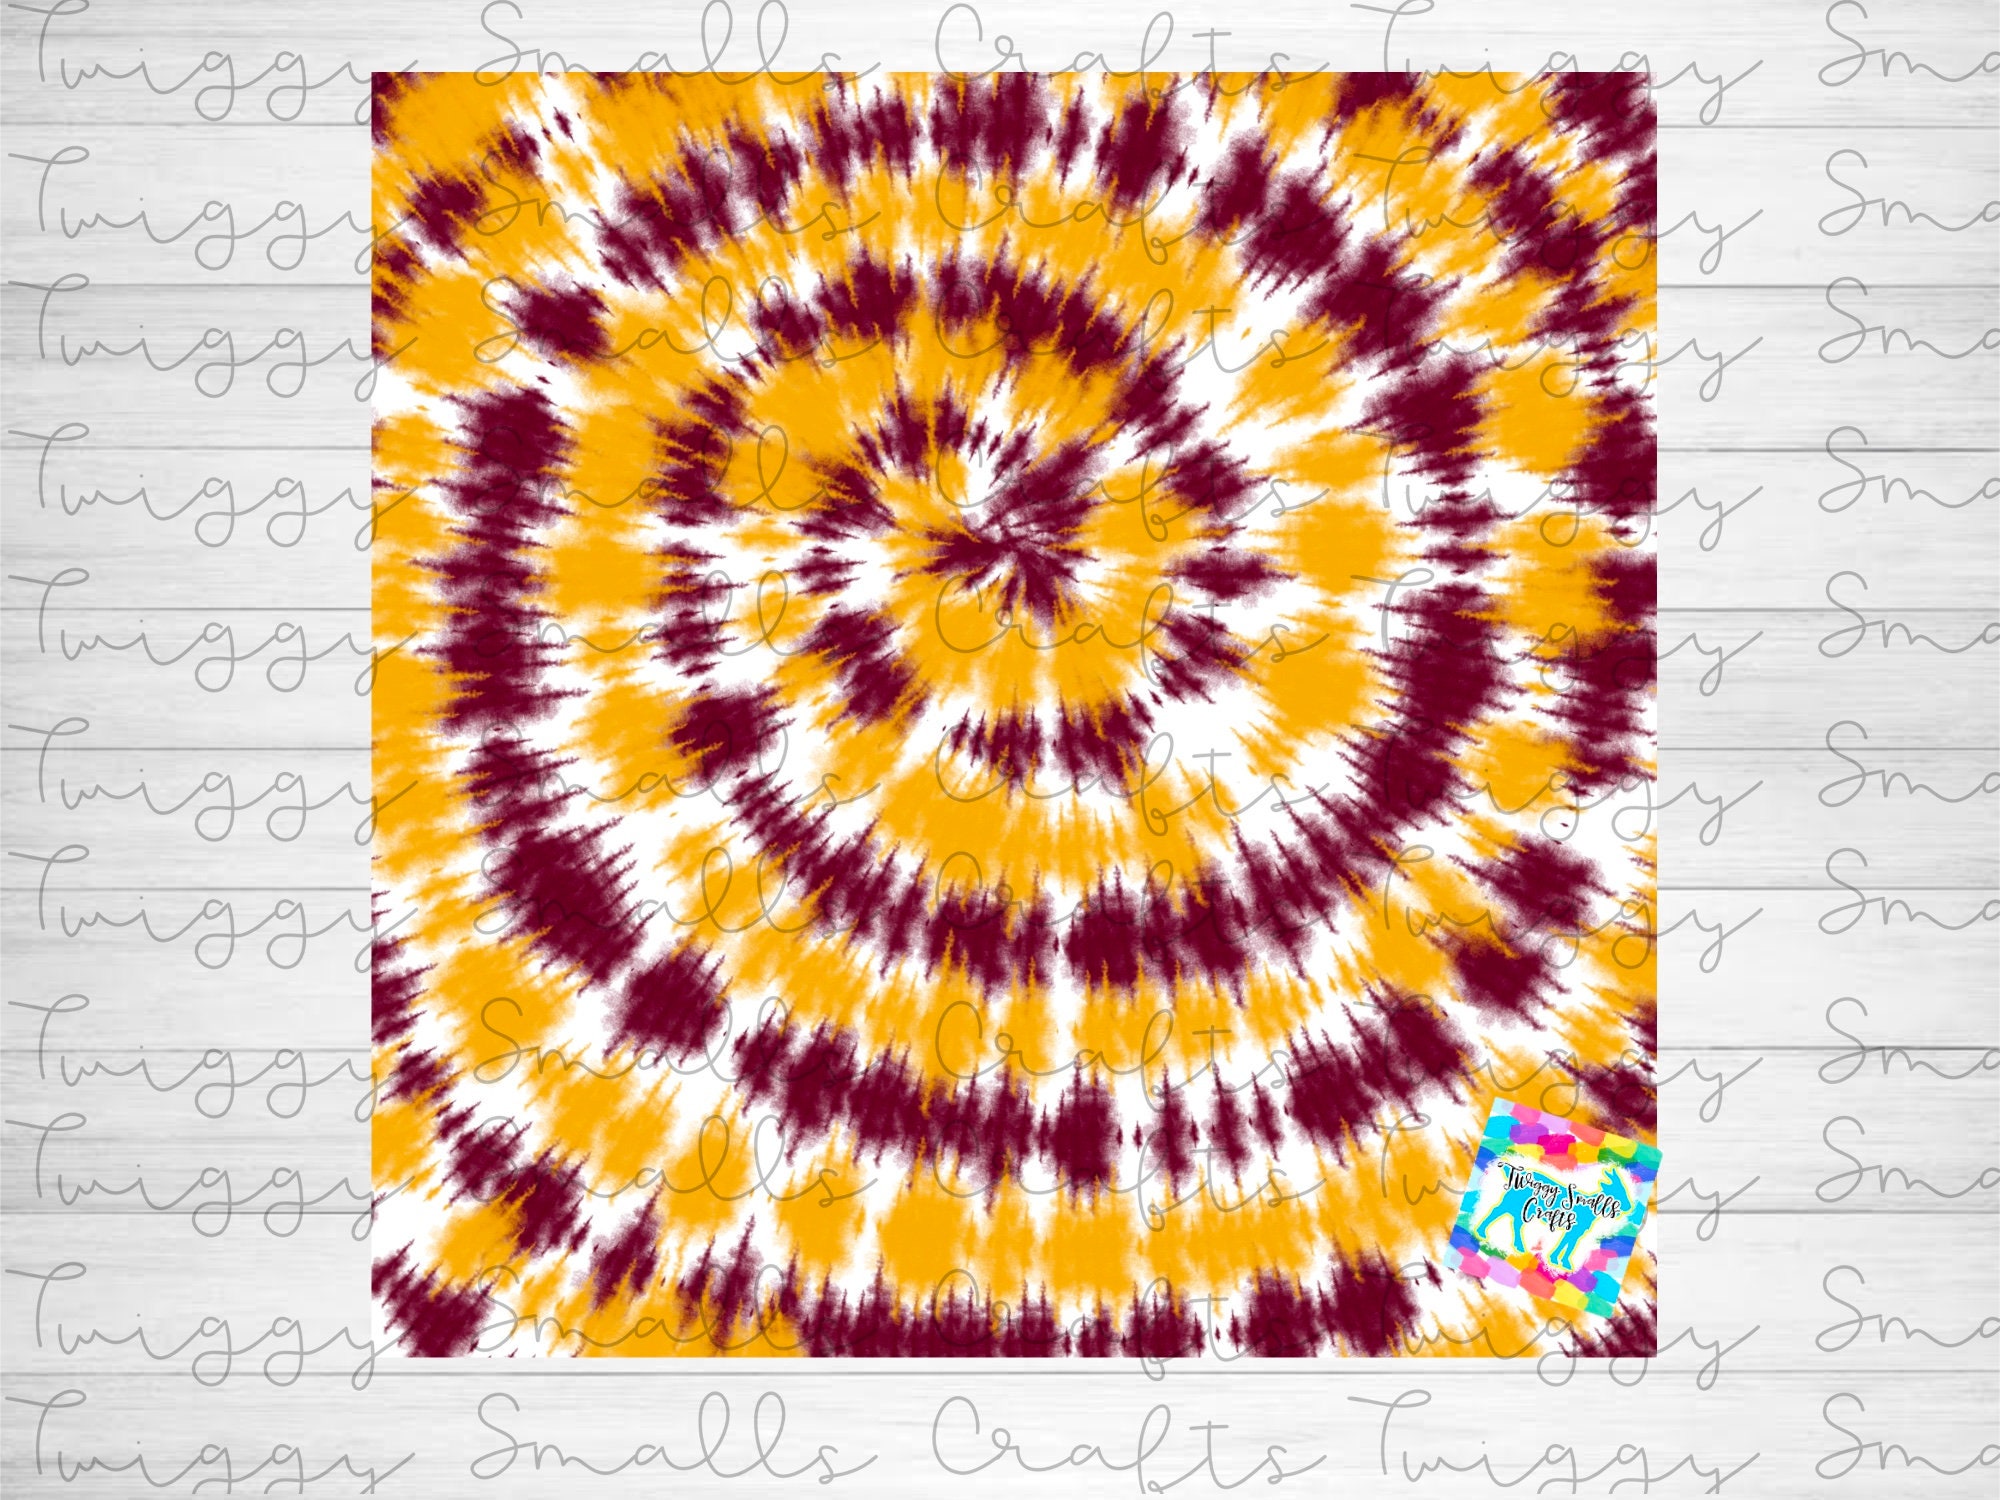 Maroon and Yellow Gold Ombre Patterned Vinyl Sheet HTV or Adhesive Vinyl  Fade/gradient Print Vinyl HTV3125 